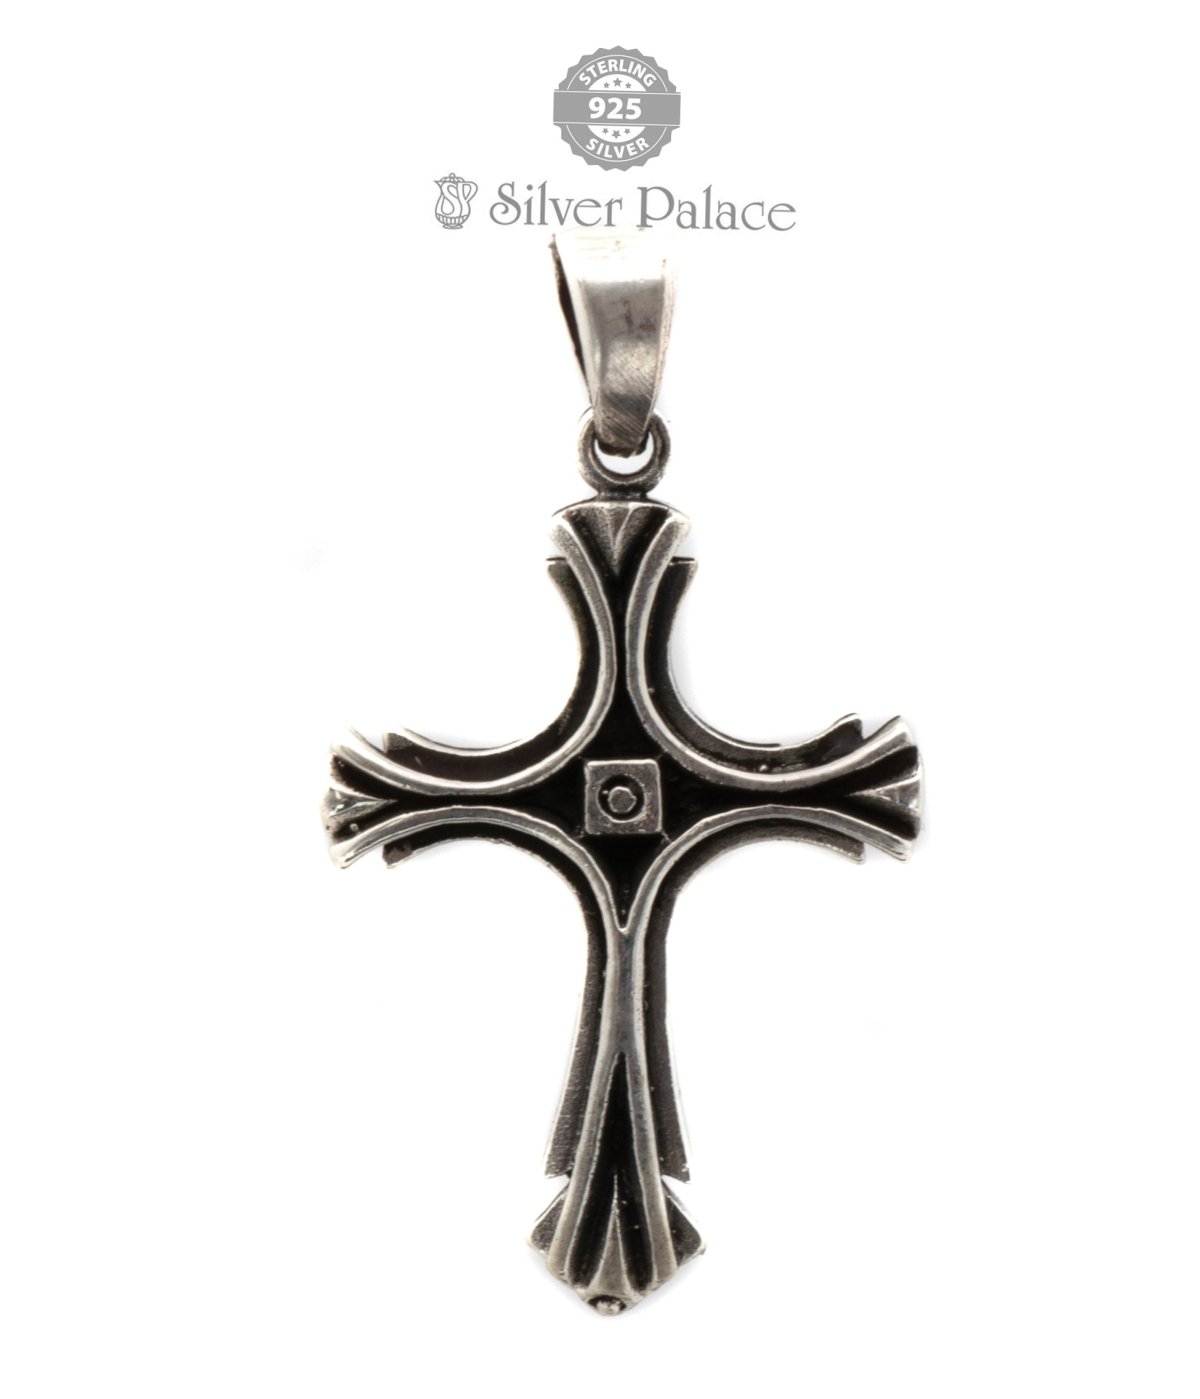 92.5 Oxidized Sterling Silver Antiqued Cross Pendant